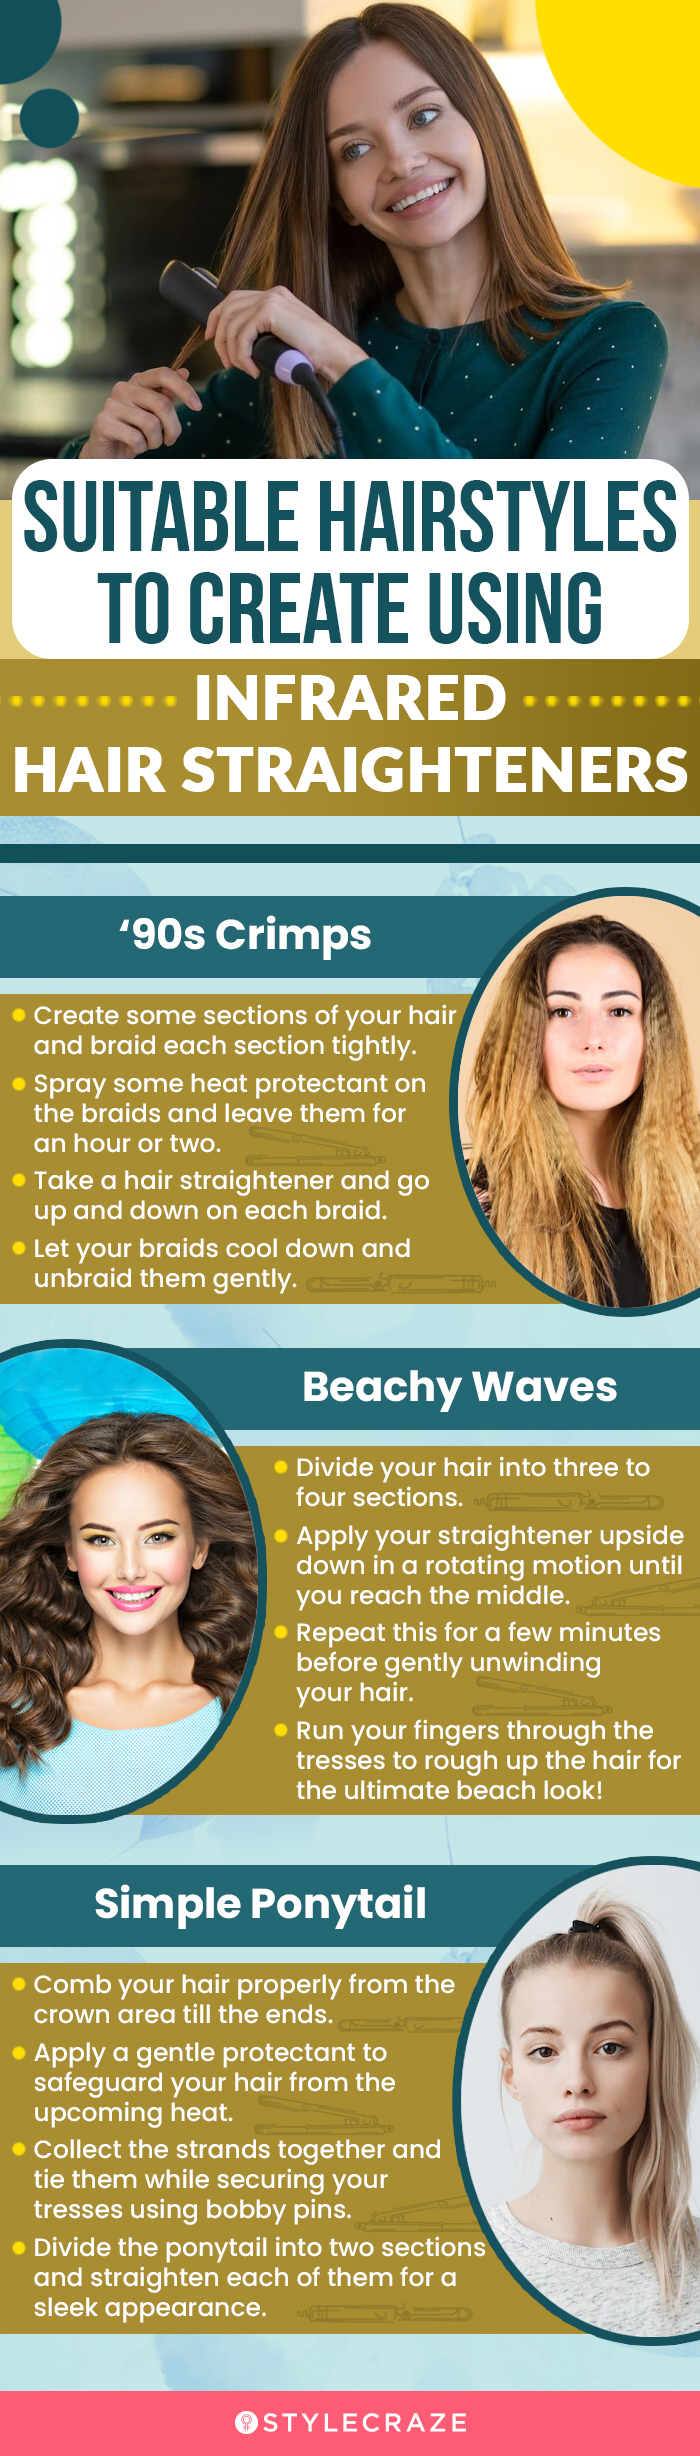 Suitable Hairstyles To Create Using Infrared Hair Straighteners (infographic)